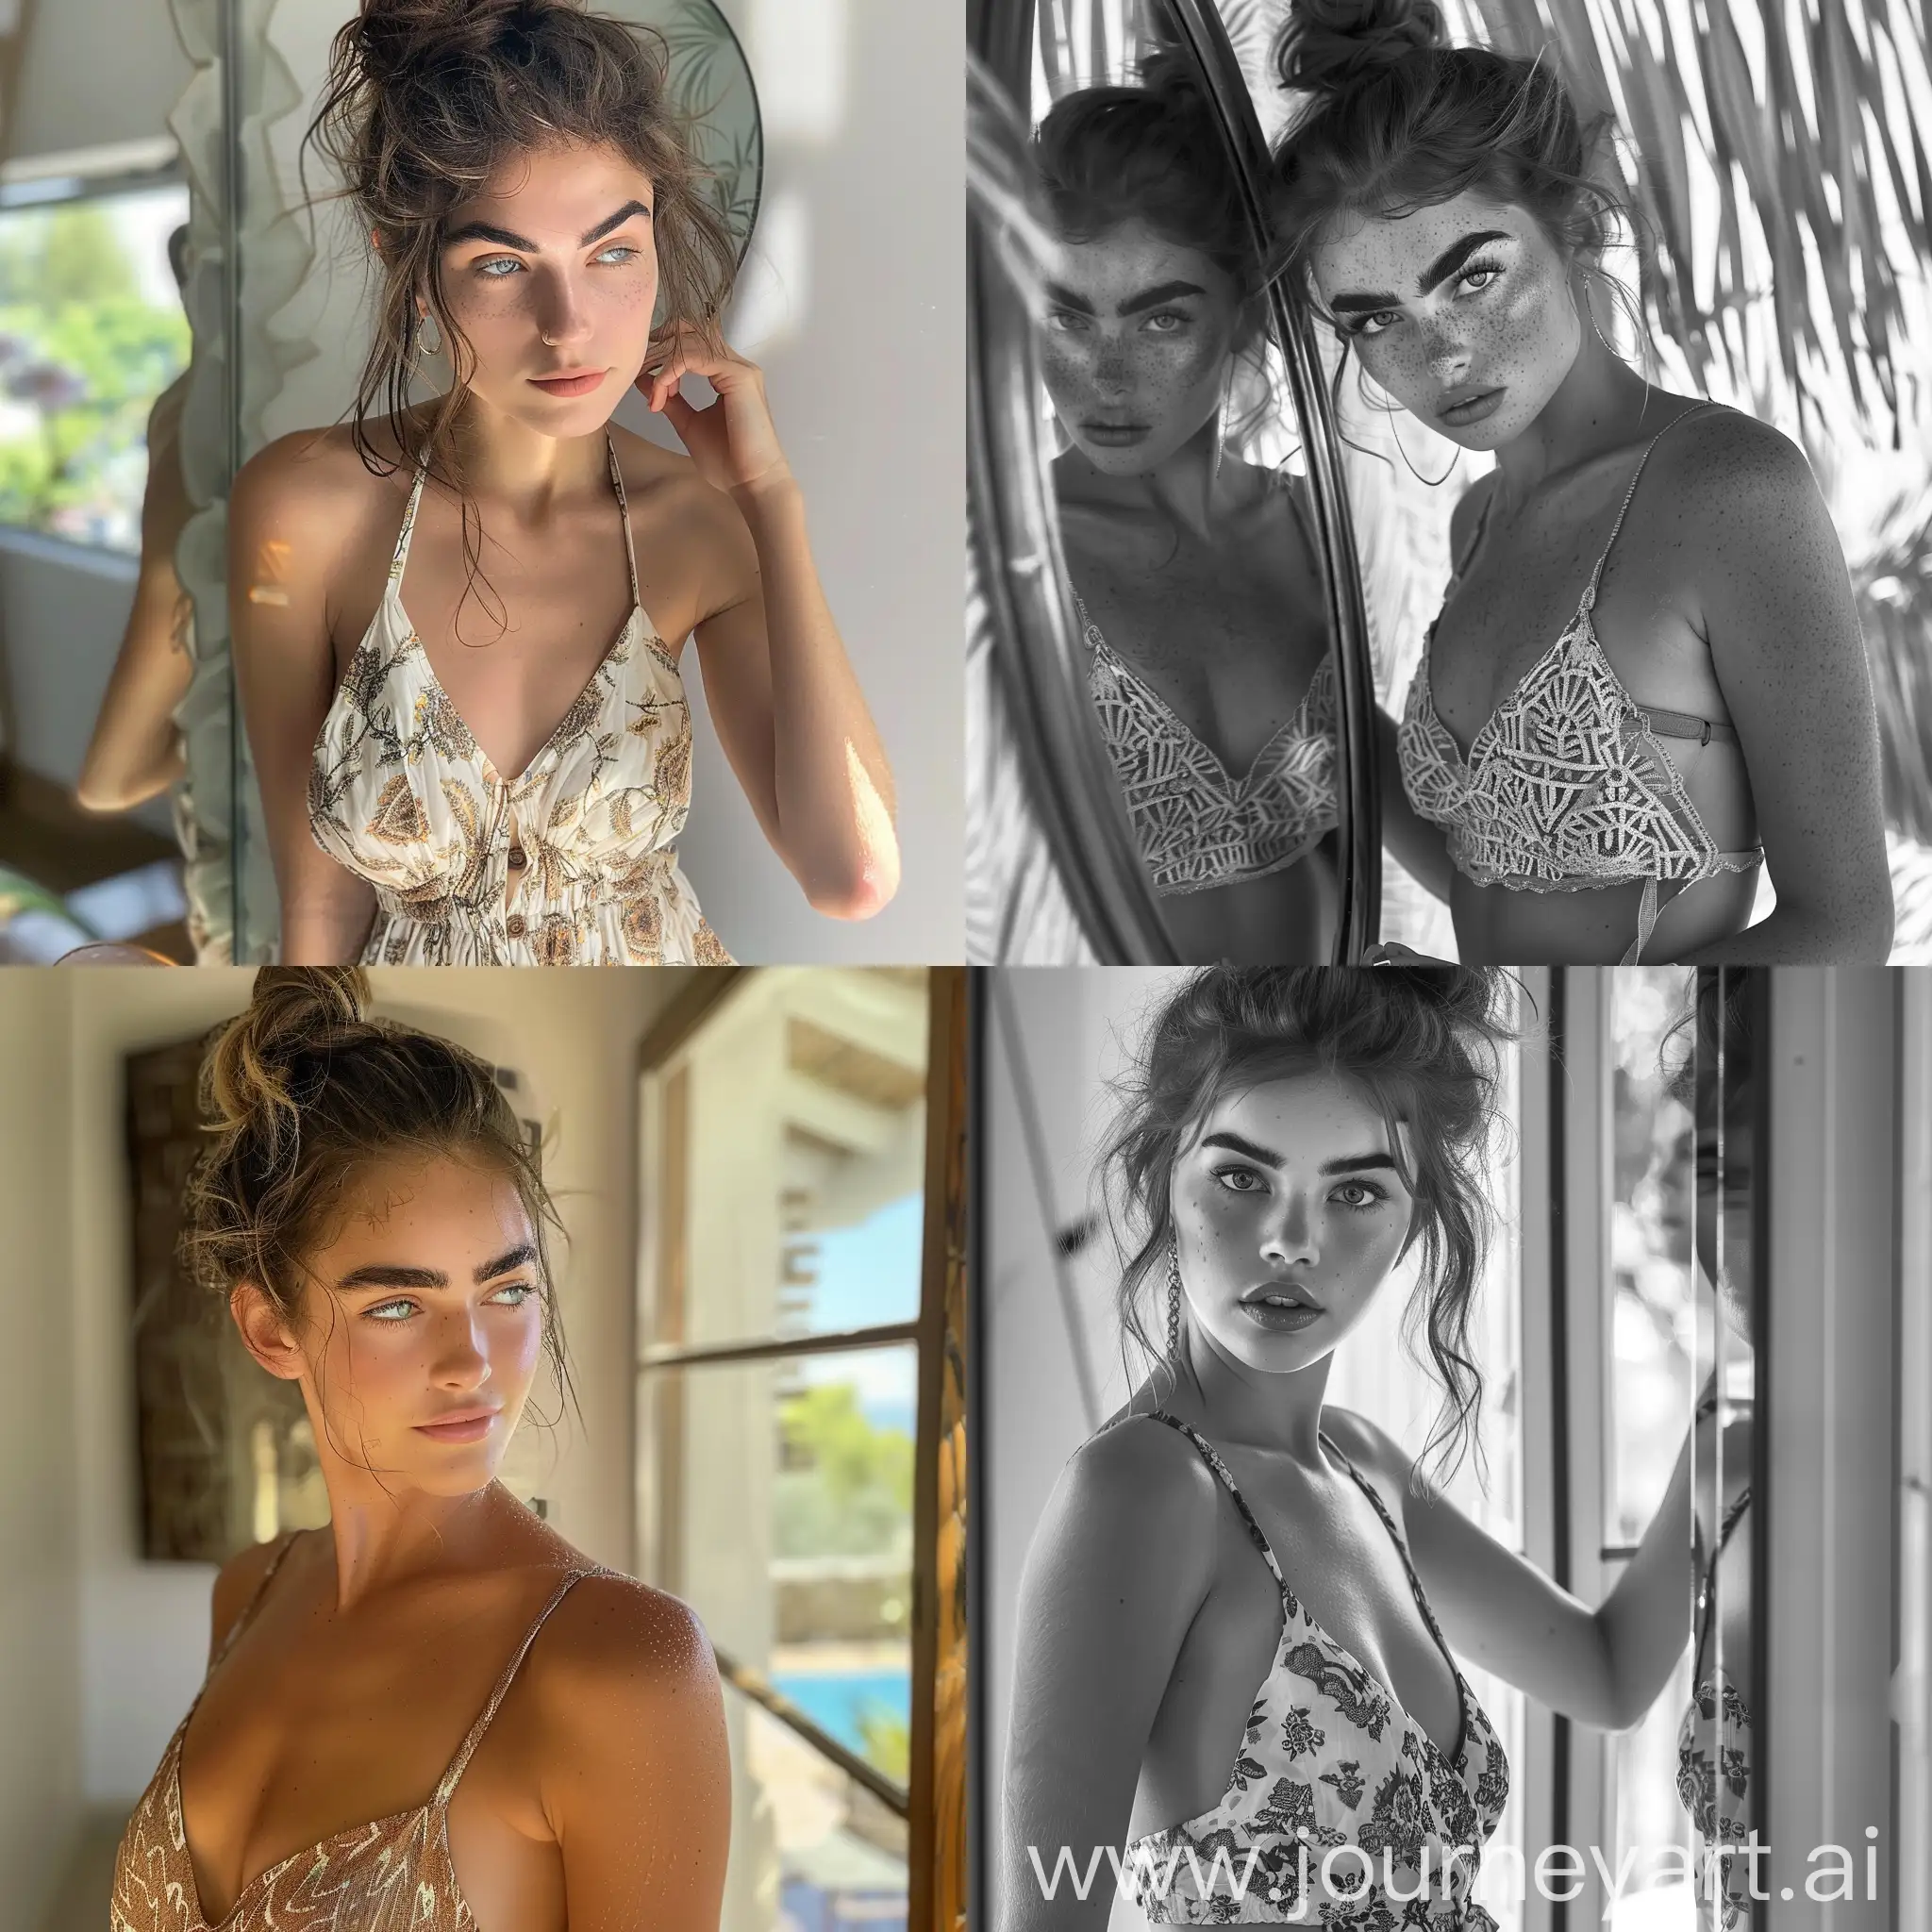 Photo: Female Super model, 18 years old, in sun dress and wedges, looking in mirror, gorgeous, bushy eyebrows, hair in messy bun -- v6 --